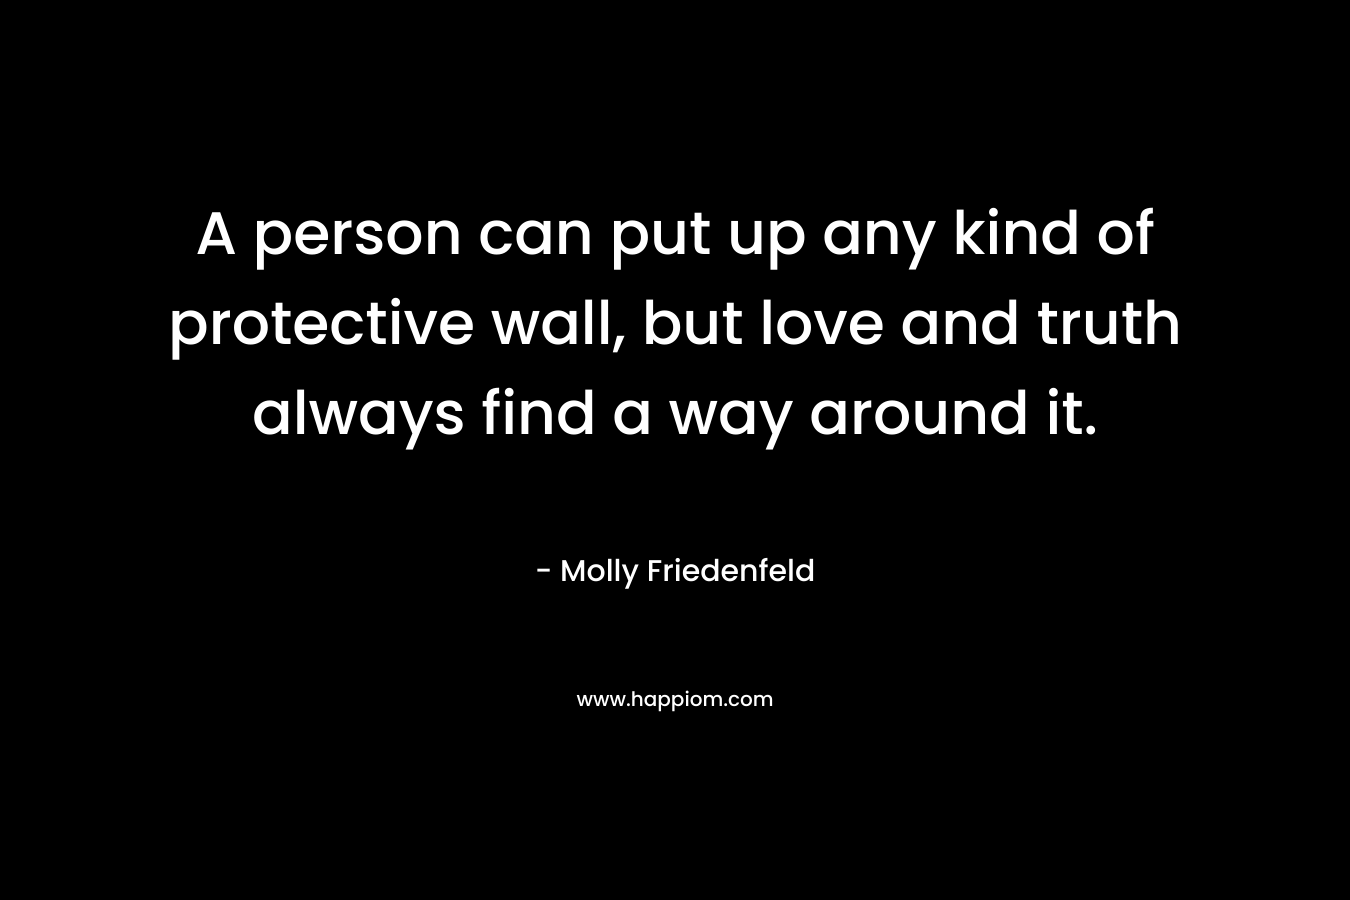 A person can put up any kind of protective wall, but love and truth always find a way around it.